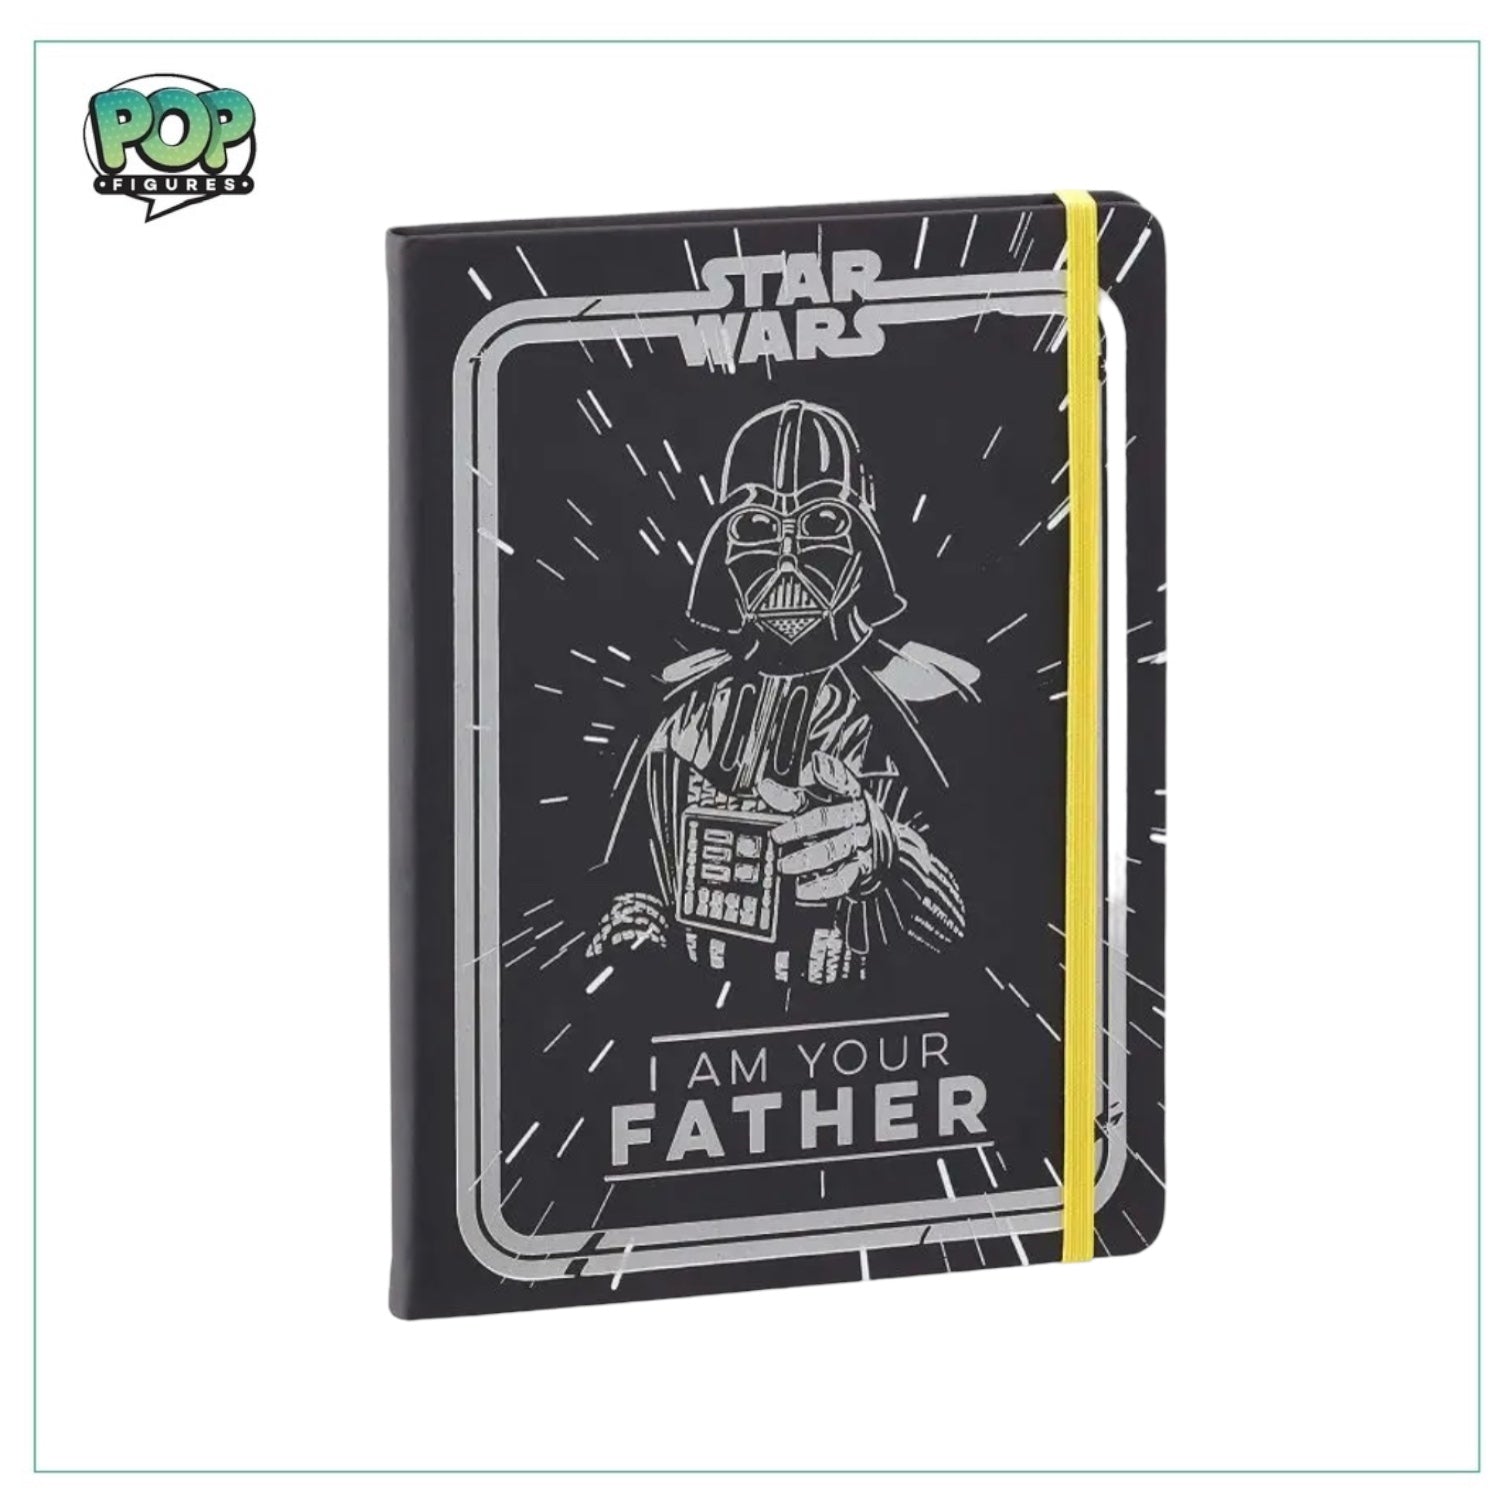 Star Wars Notebook - I Am Your Father - Star Wars